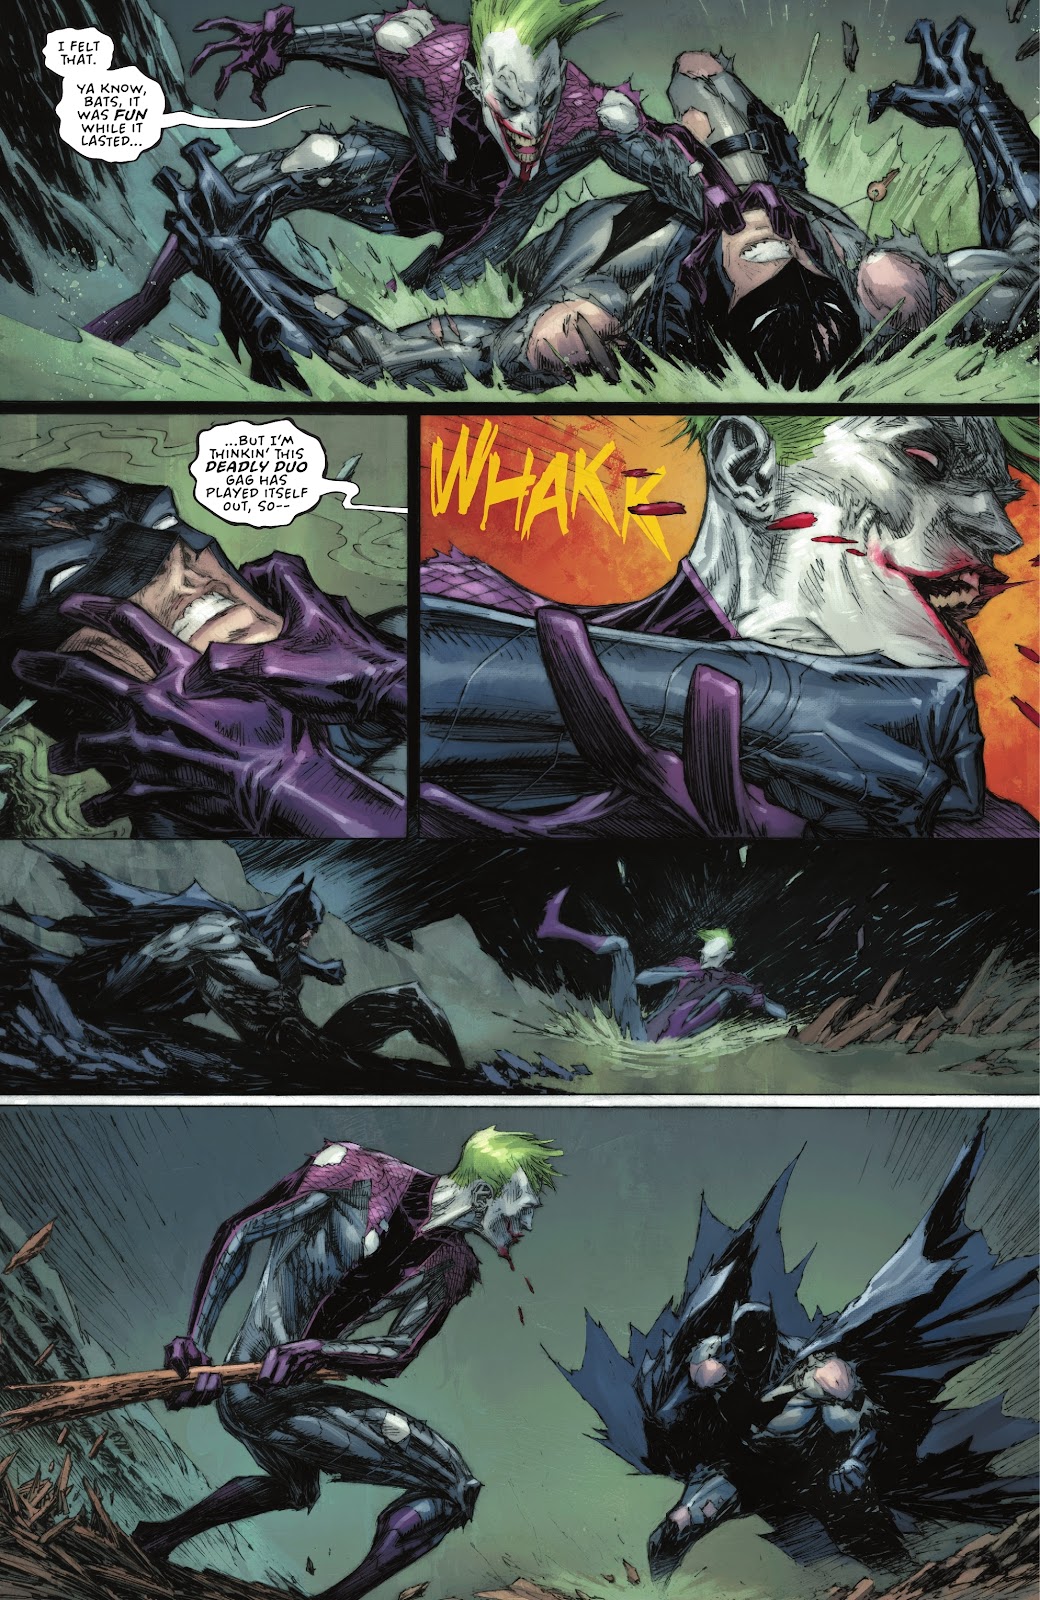 Batman & The Joker: The Deadly Duo issue 7 - Page 6